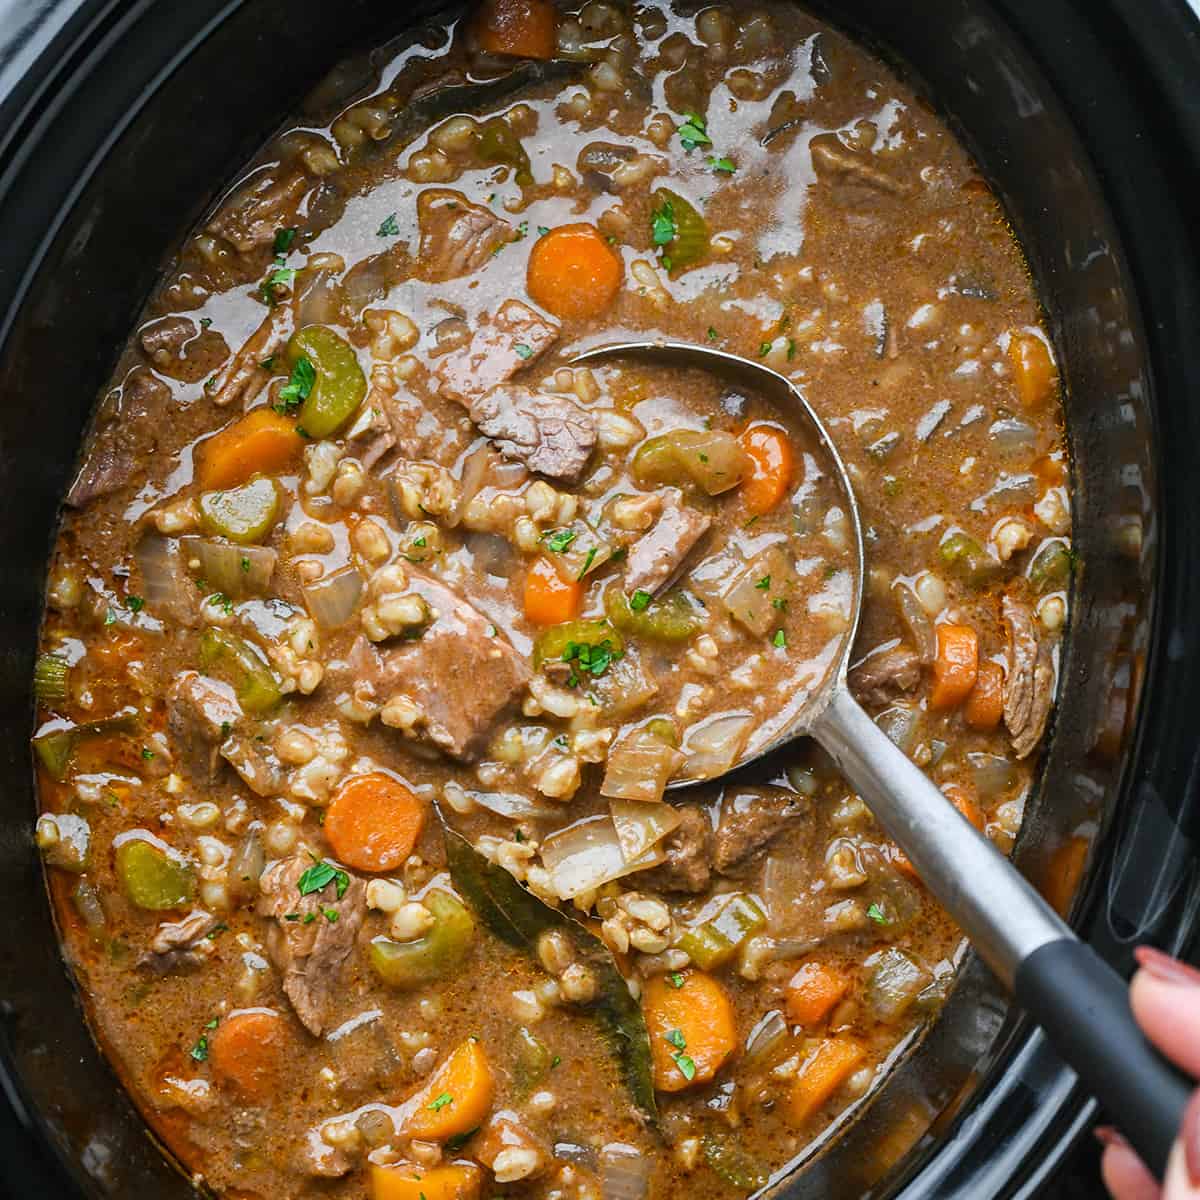 a ladle taking a scoop of Beef Barley Soup out of a slow cooker